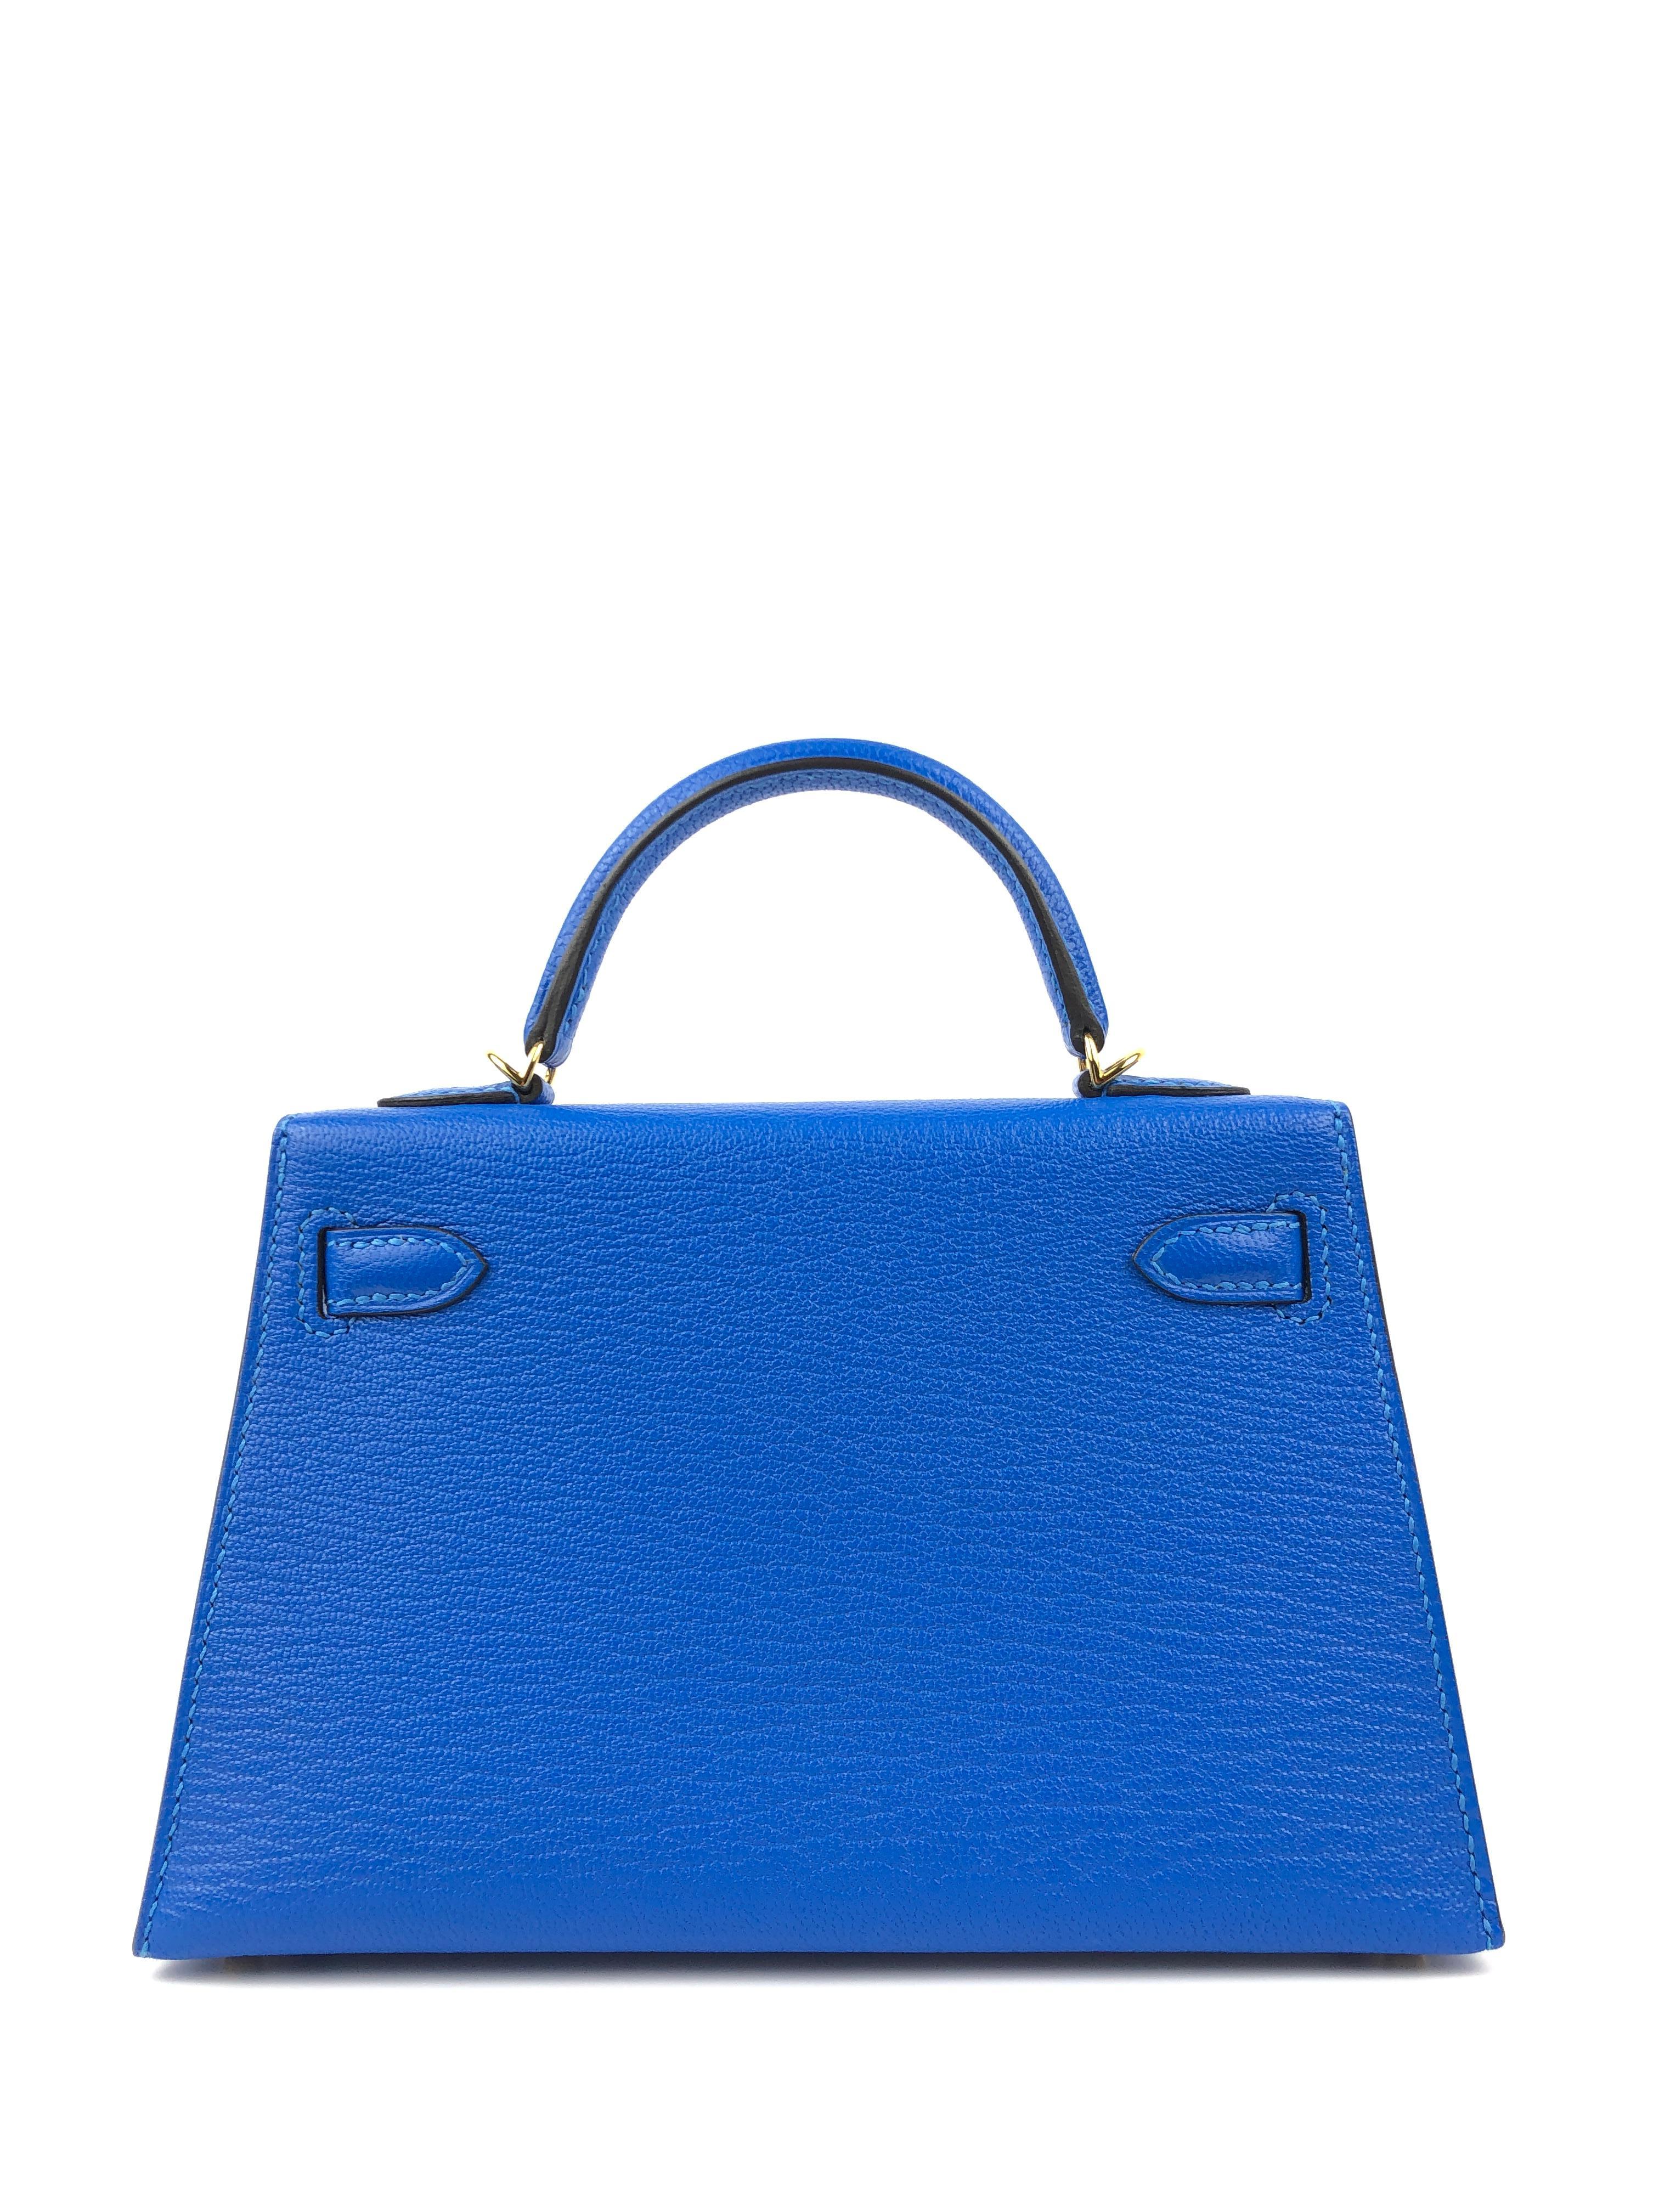 This authentic Hermès Intense Blue Chevre 20 cm Mini Kelly is pristine with the protective plastic intact on the hardware.  Petite and feminine, the crossbody Kelly is very rare in the 20 cm silhouette.
Intense blue chevre leather is extremely